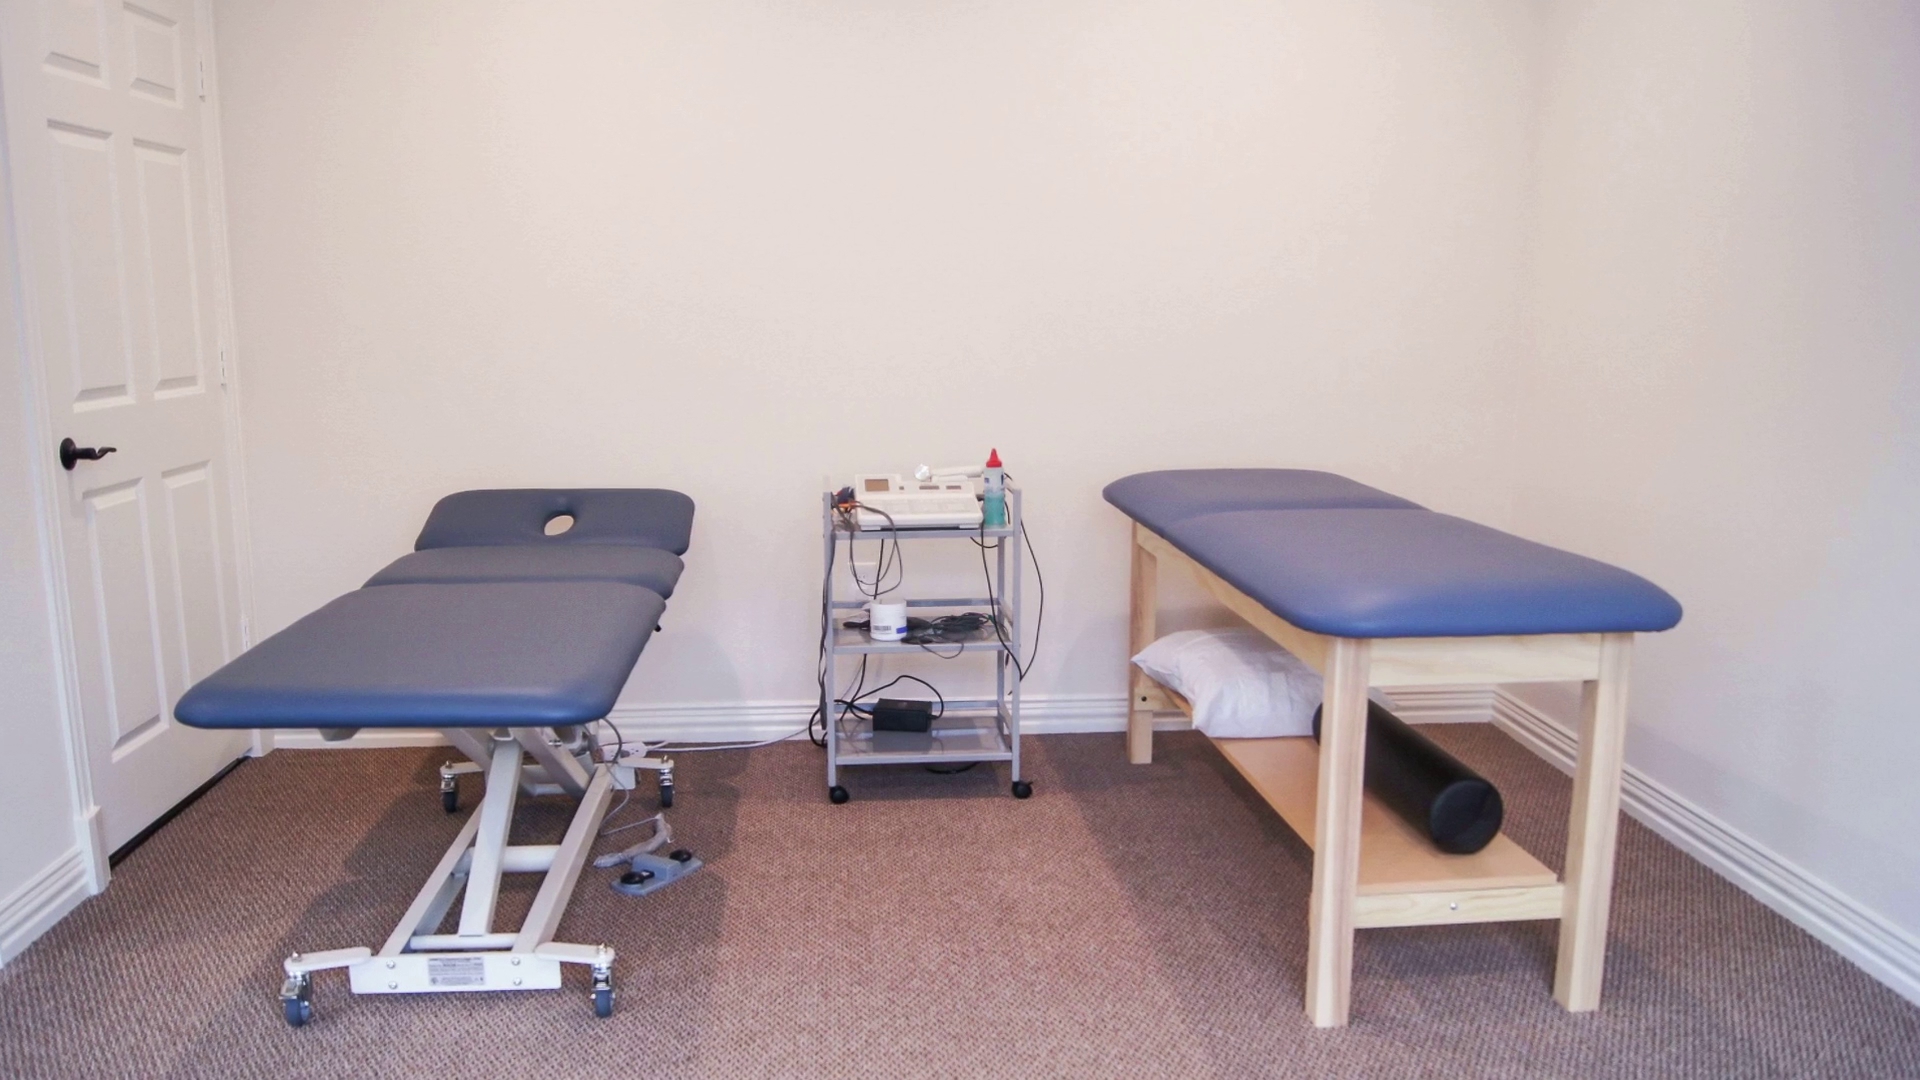 Primecare Chiropractic & Physical Therapy